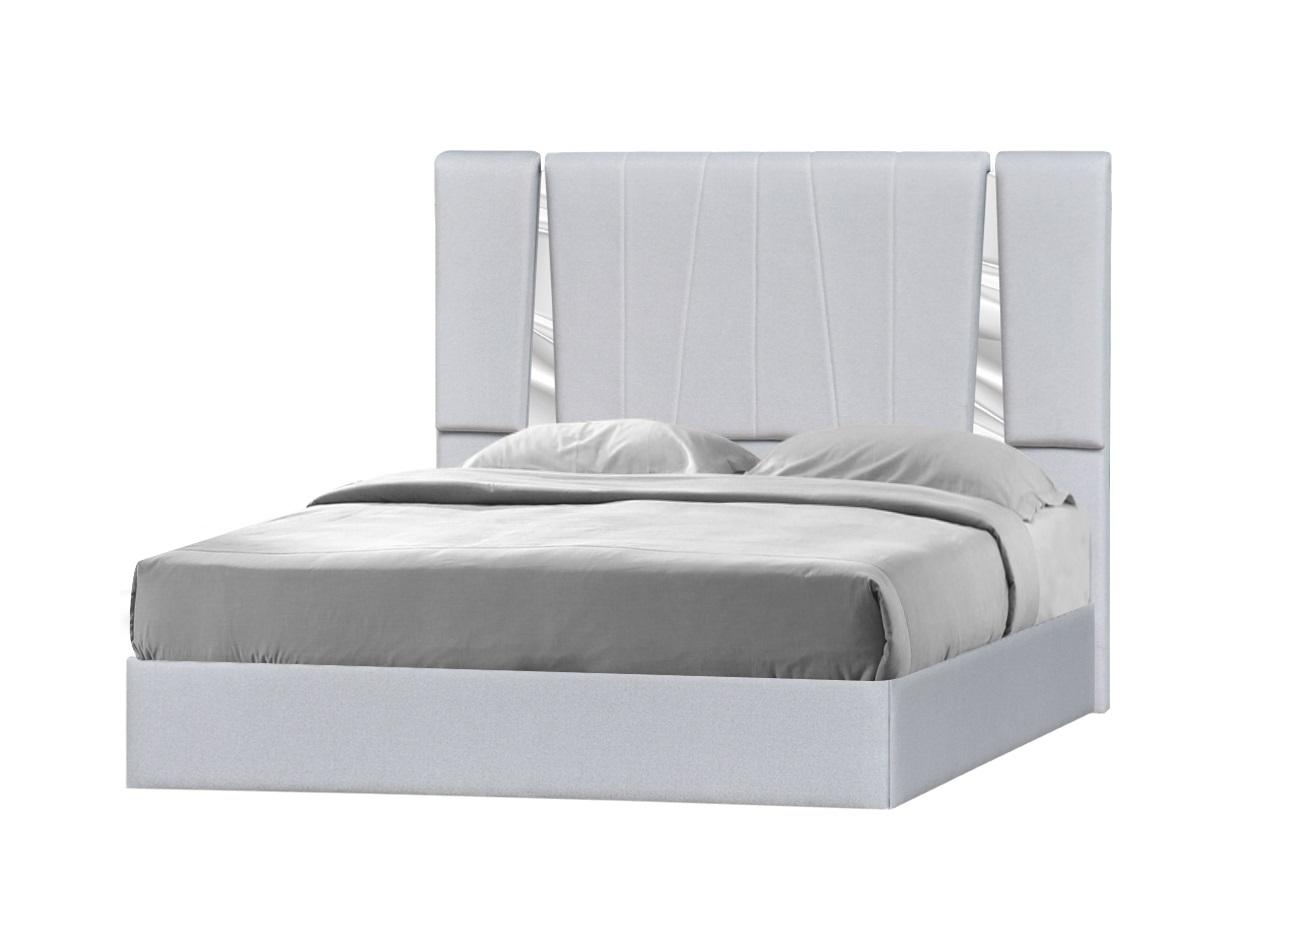 Contemporary Platform Bed Matisse SKU 18711-K-Bed in Silver Fabric